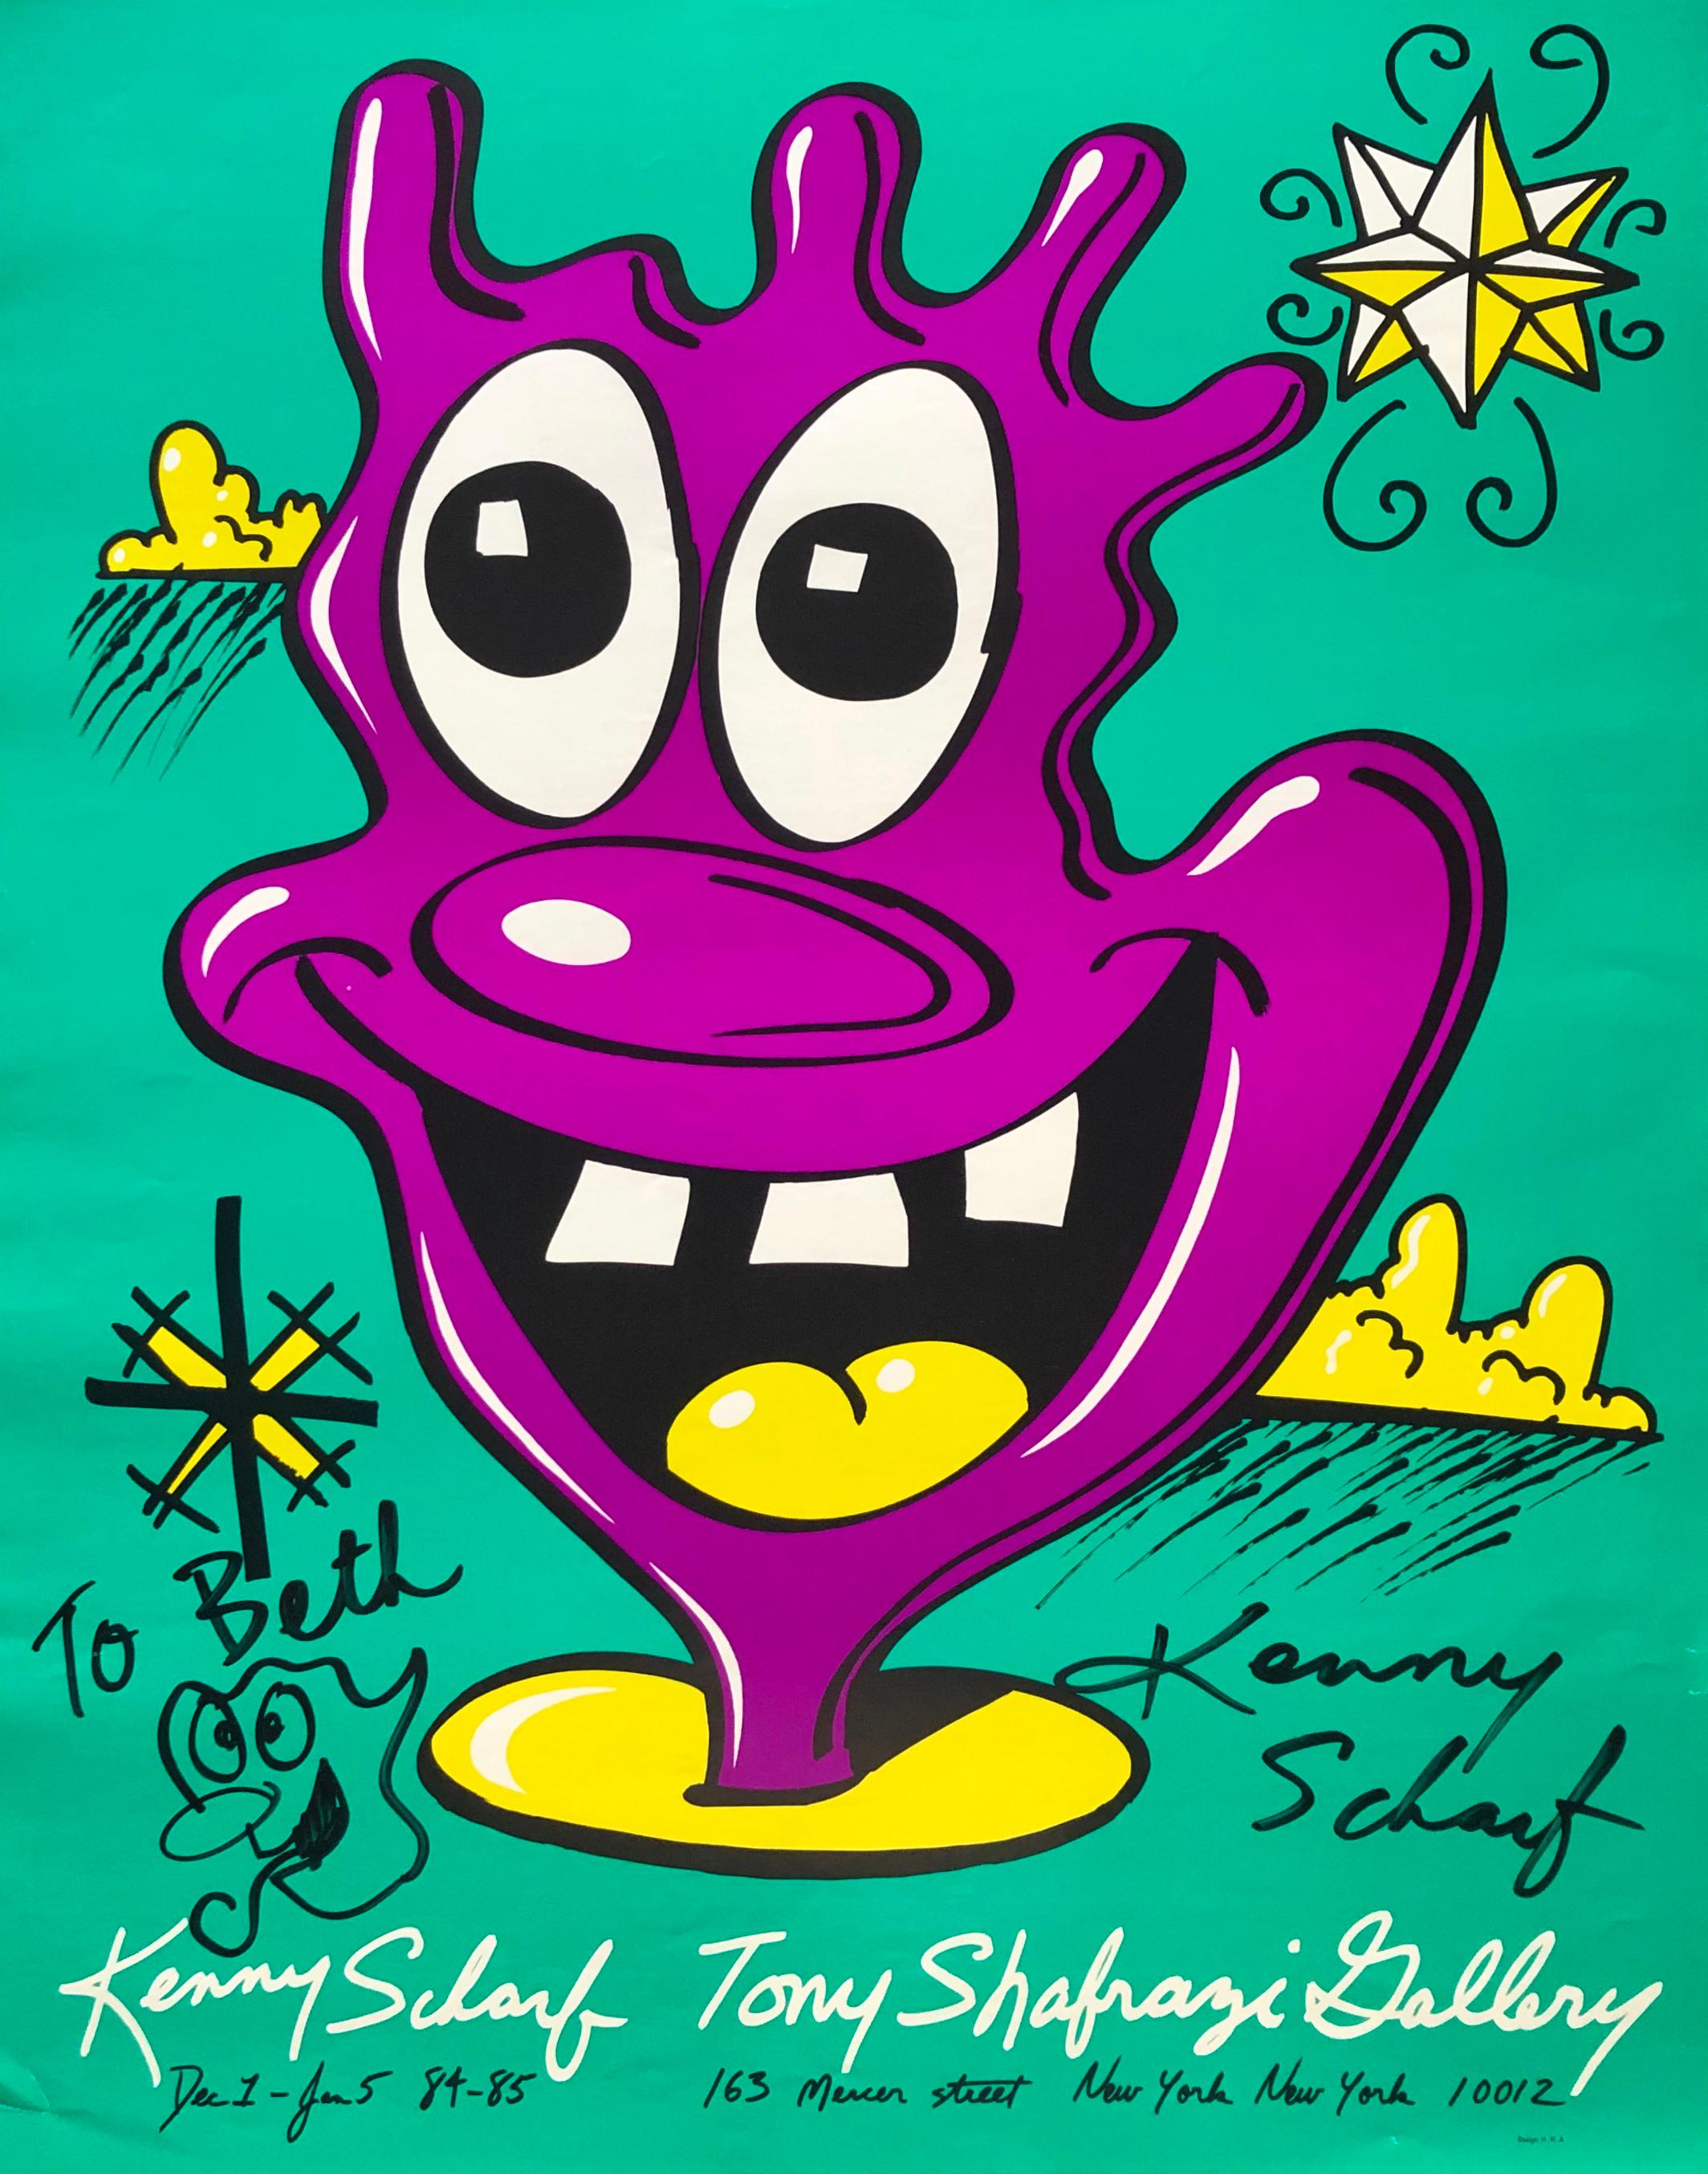 Signed 1984 Kenny Scharf Tony Shafrazi exhibition poster, featuring hand illustrated drawing (lower left). 

Medium: Off Set Lithograph printed in colors. 
Dimensions: 29 x 23 inches.
Hand signed by Scharf on the lower right; annotated on lower left